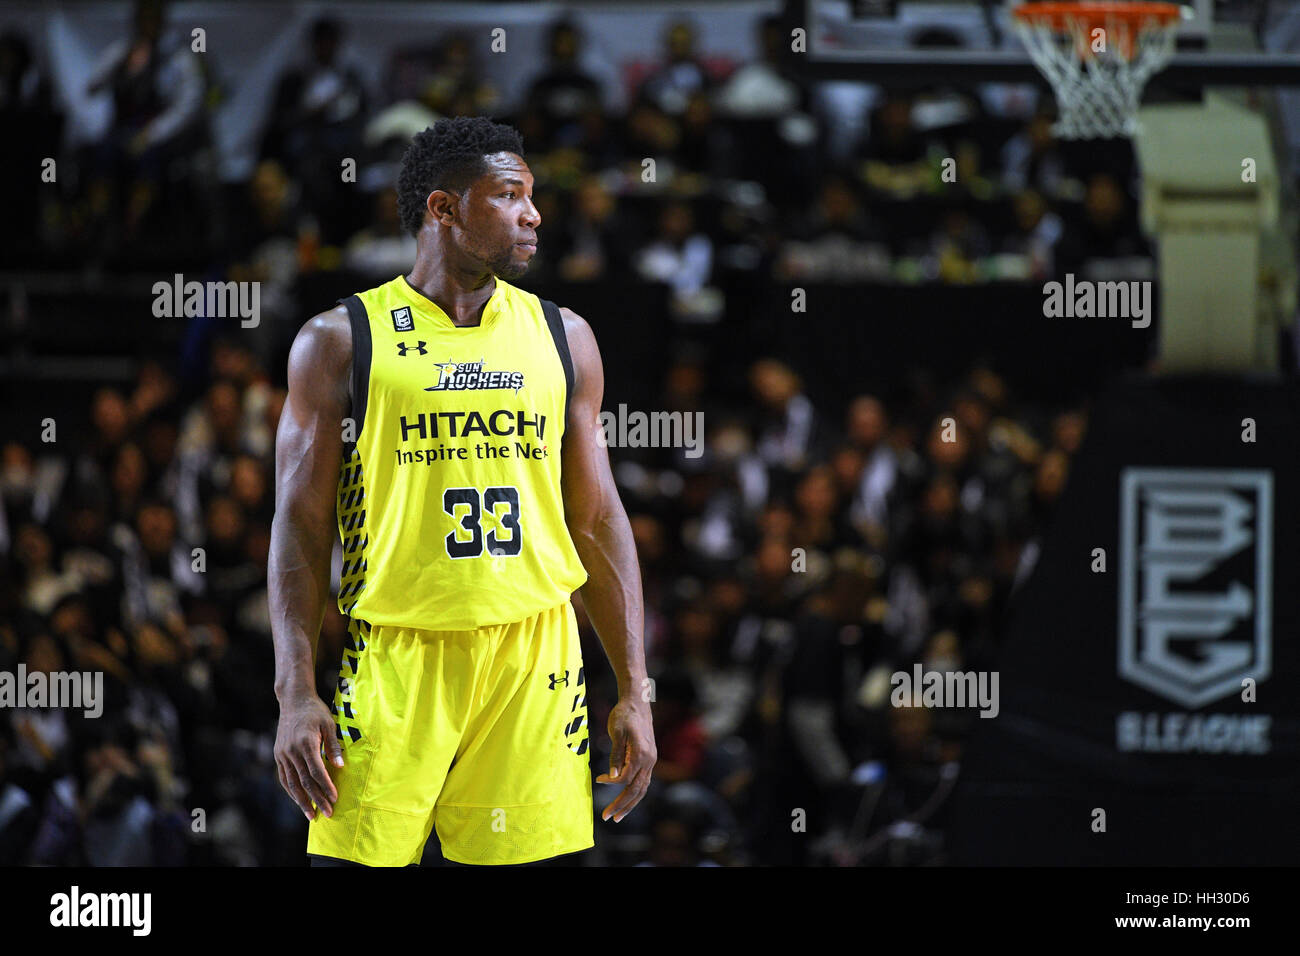 Tokyo, Japan. 15th Jan, 2017. Ira Brown (Sunrockers) during the B League All Star Game 2017 Dunk contest at 1st Yoyogi Gymnasium in Tokyo, Japan. Credit: Aflo Sport/Alamy Live News Stock Photo